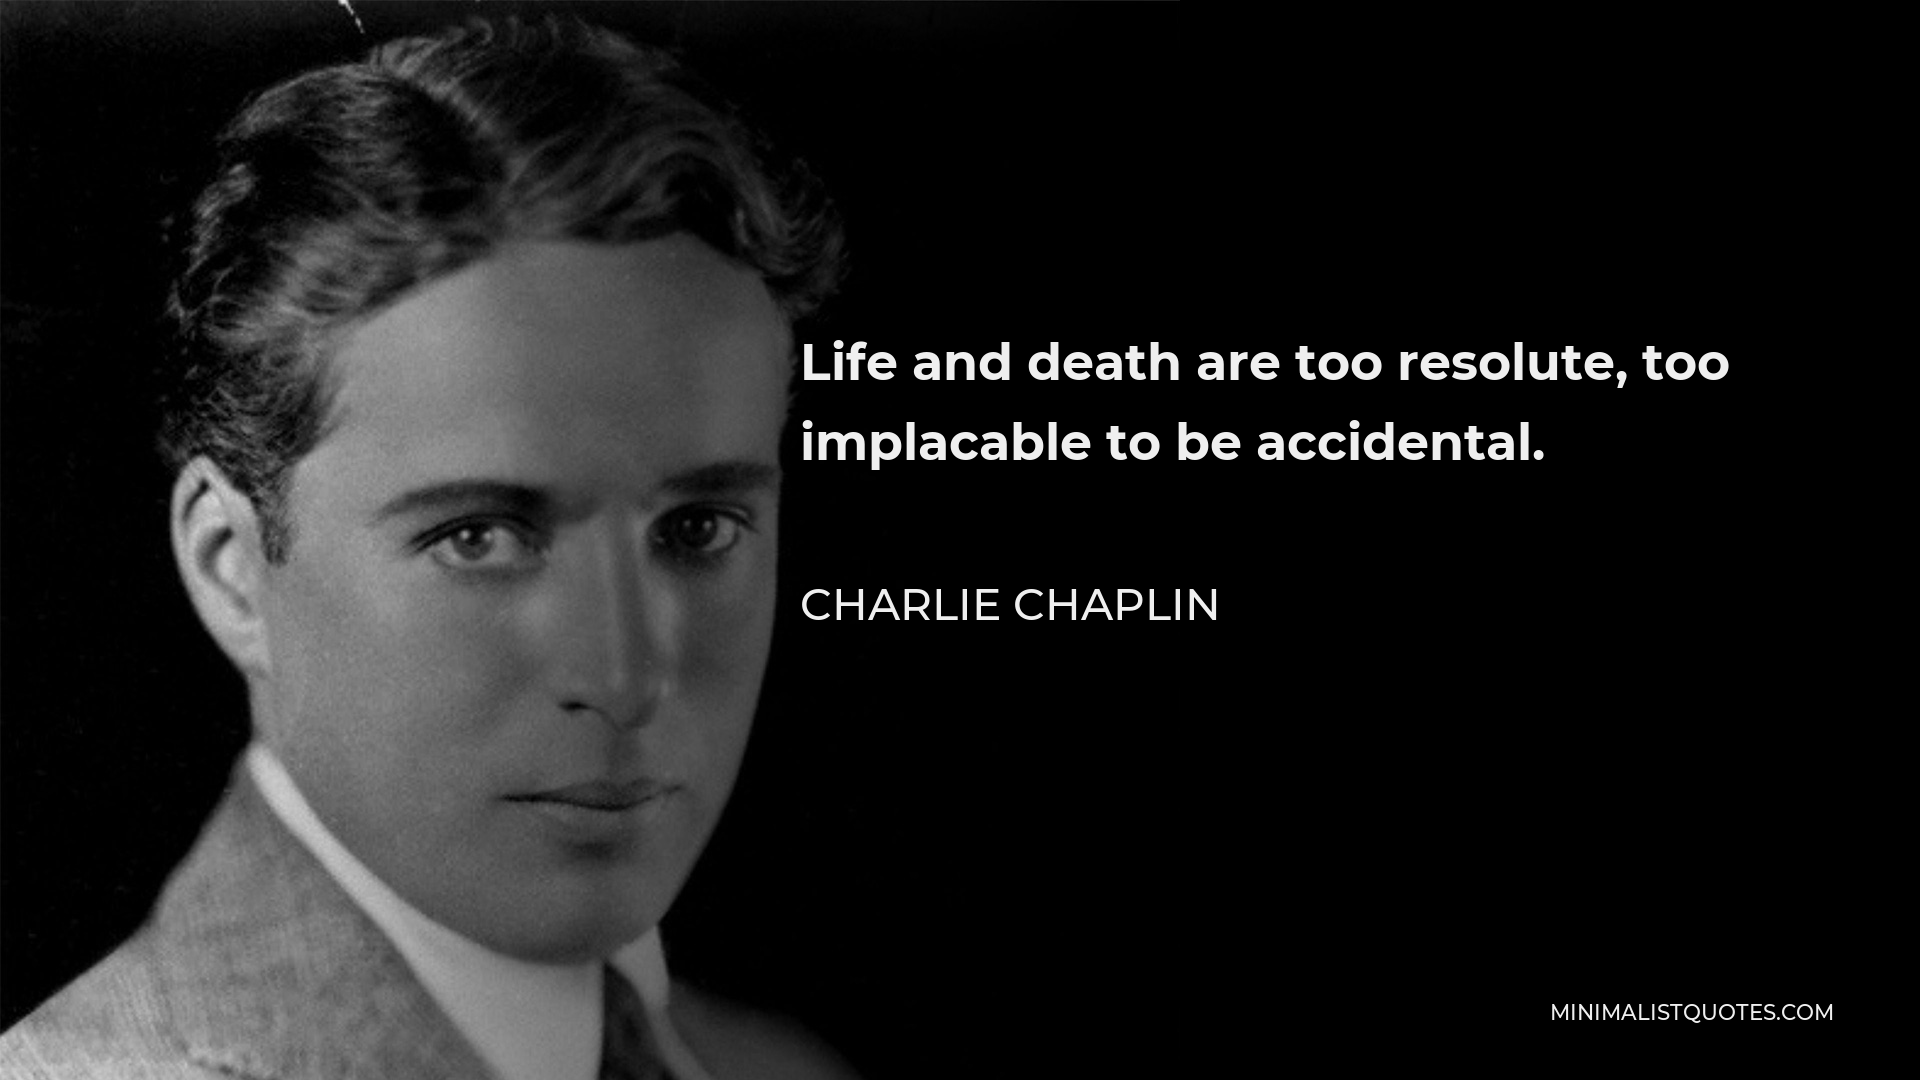 Charlie Chaplin Quote - Life and death are too resolute, too implacable to be accidental.